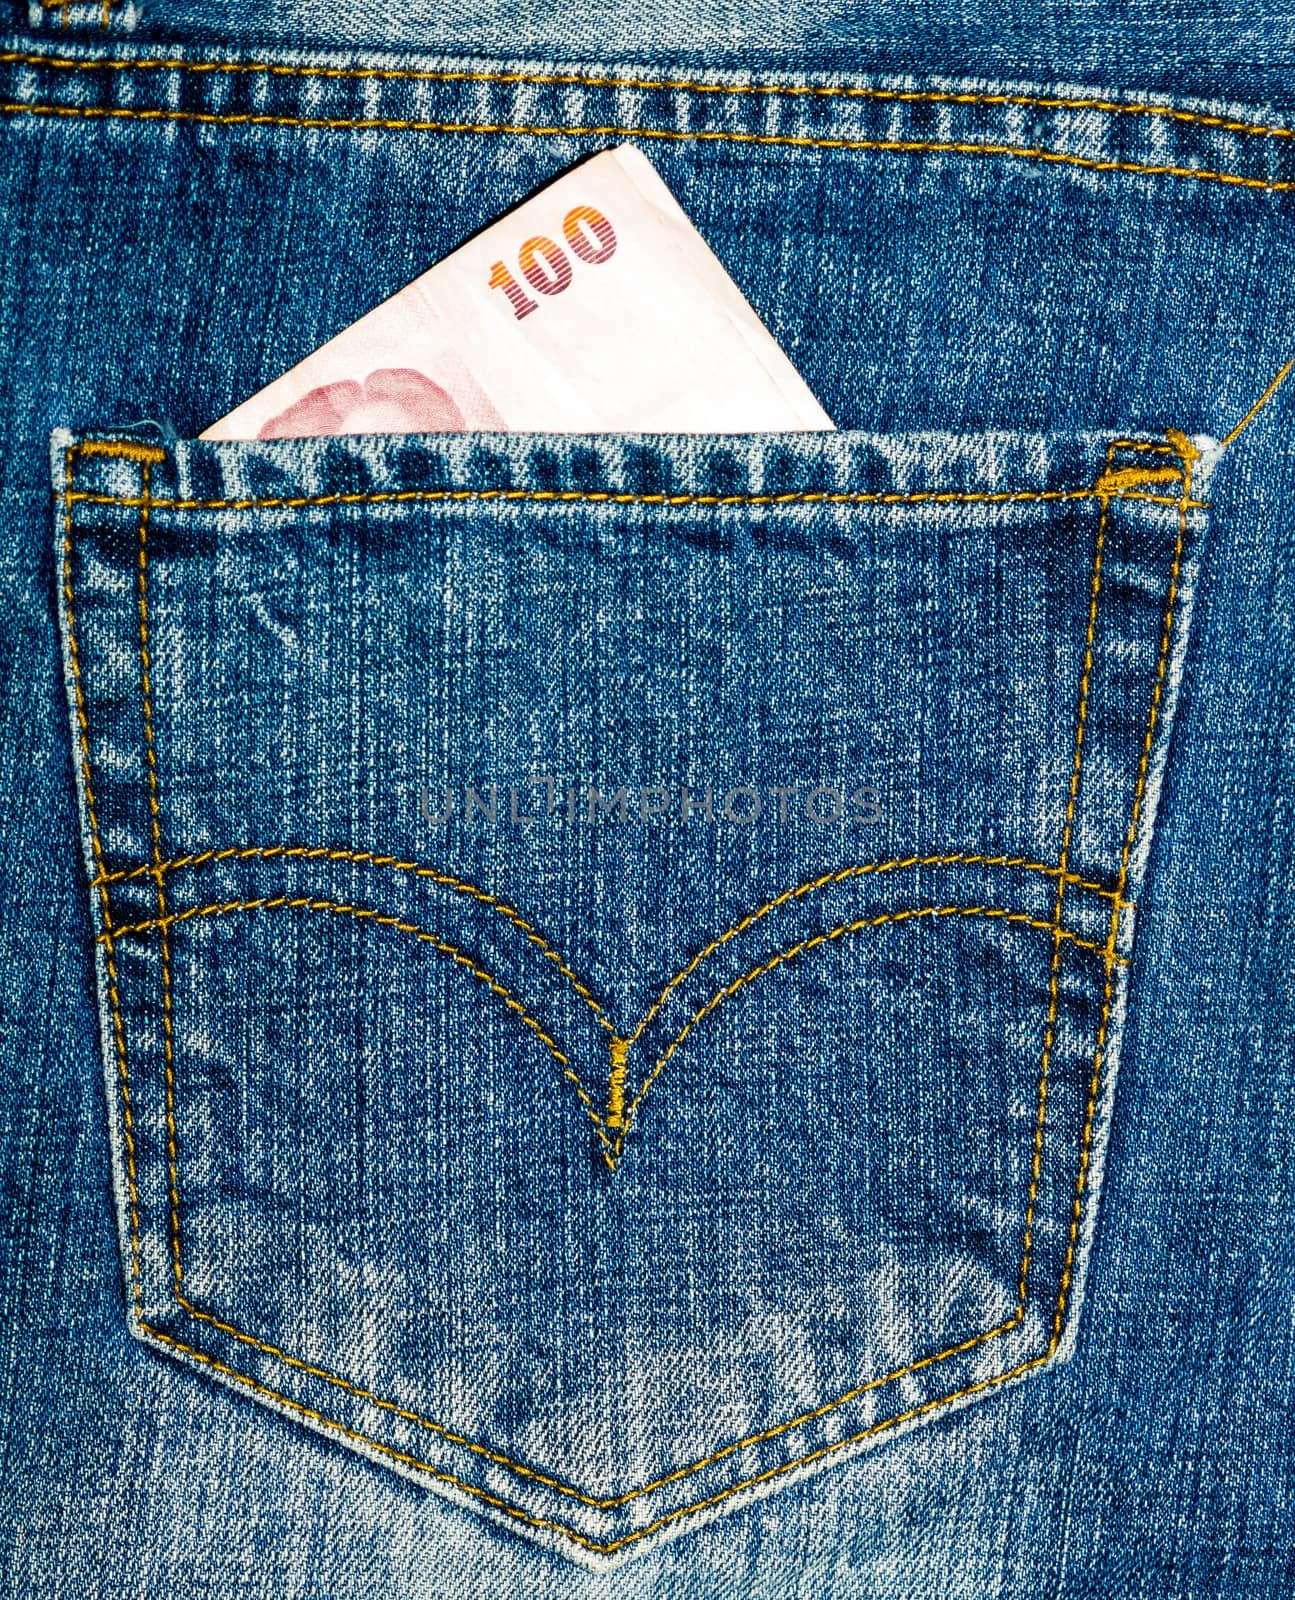 Close up blue jeans pocket and thai money.